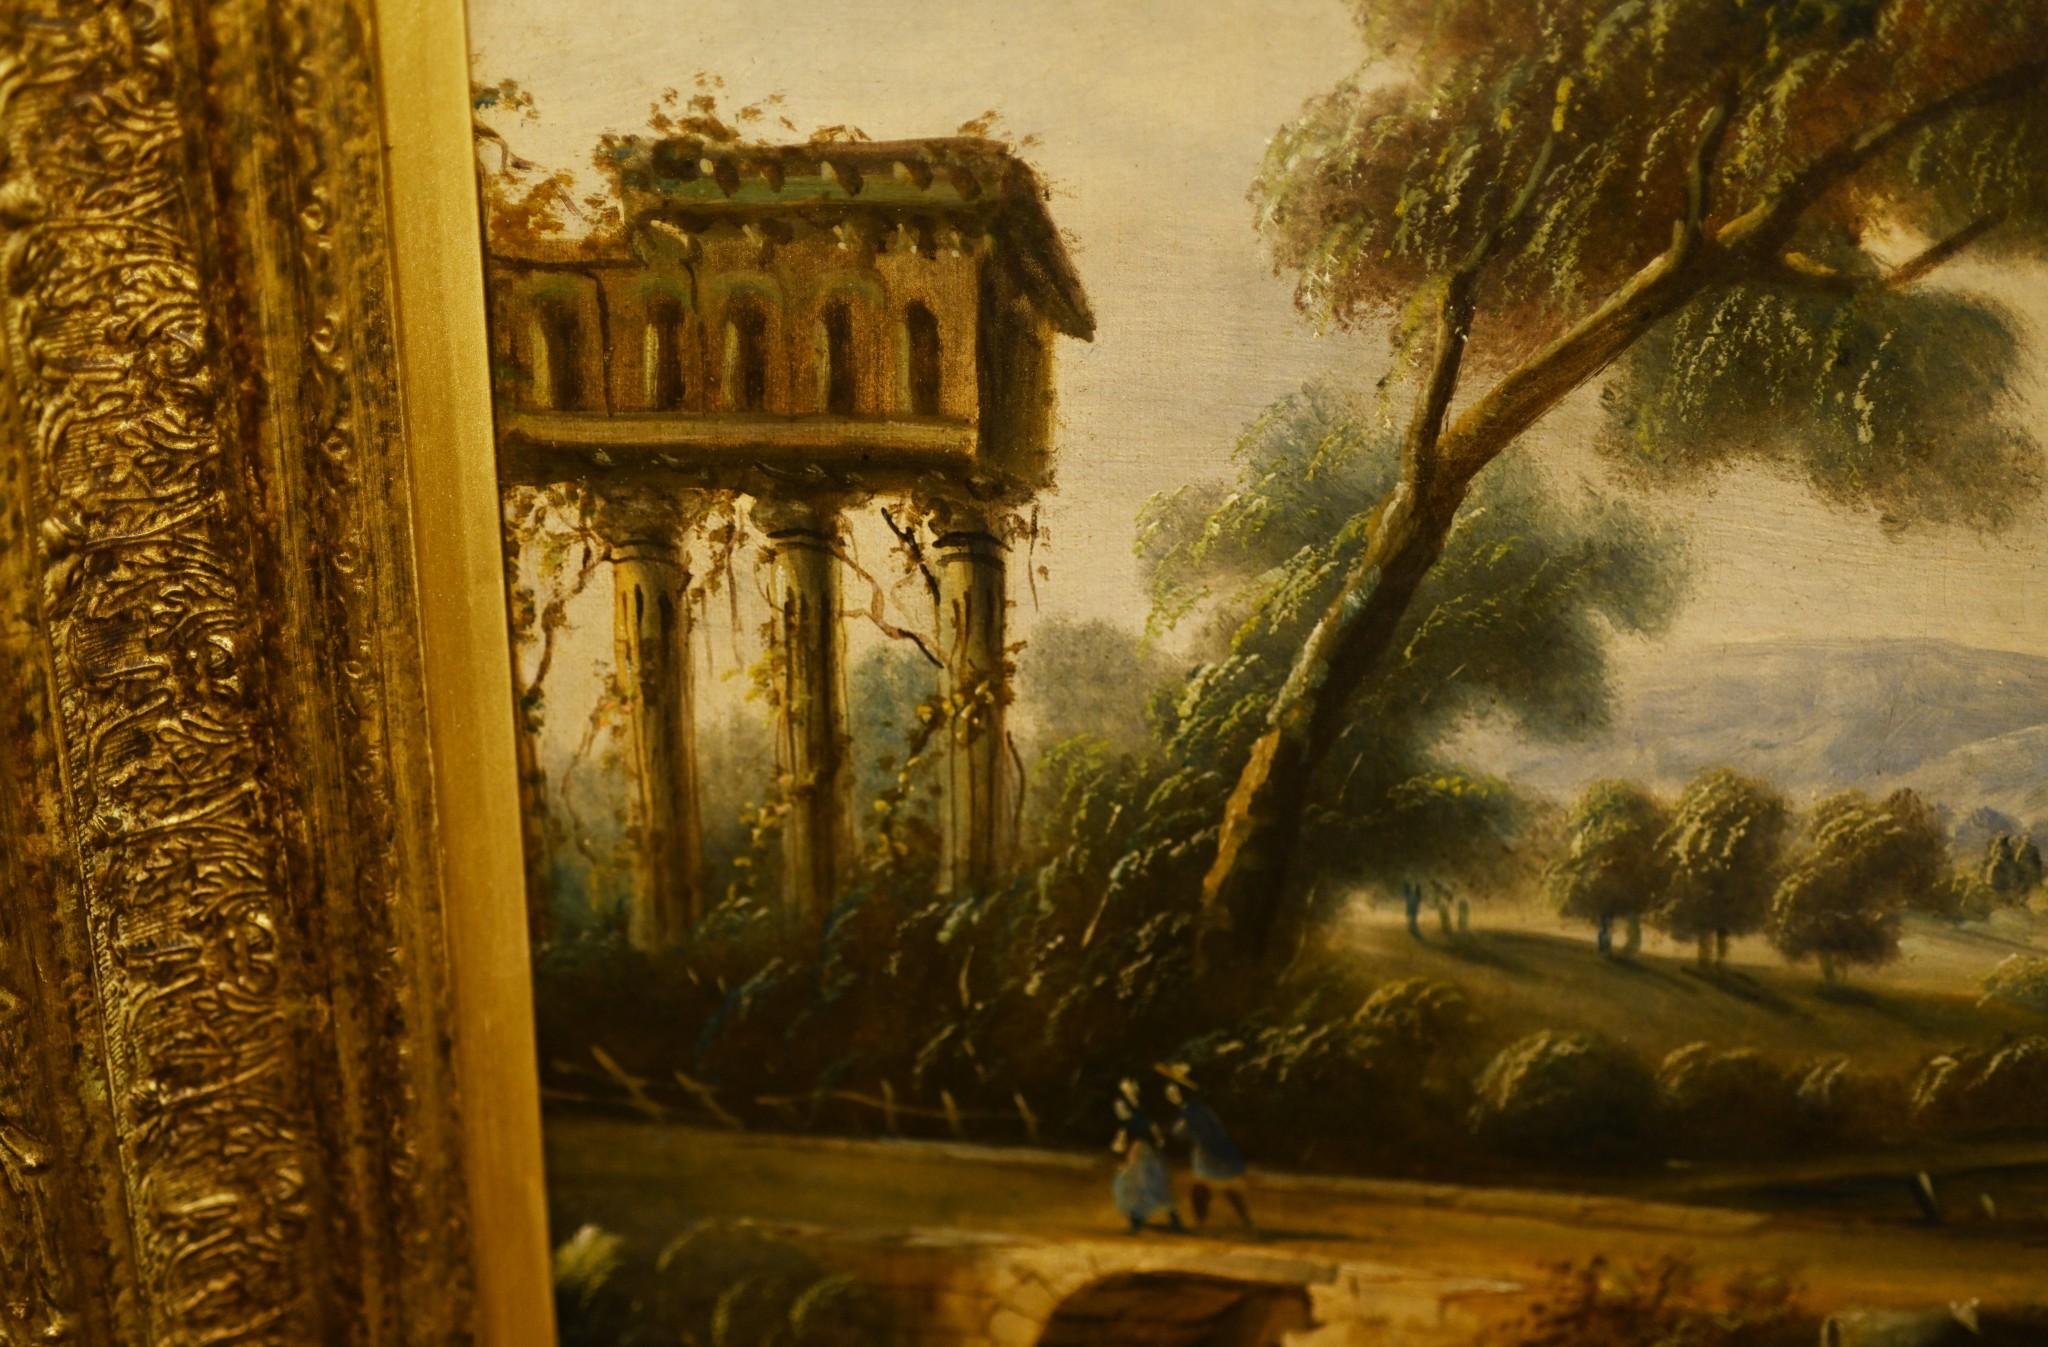 Gorgeous Italian oil painting showing a classic Tuscan landscape
Great work of Grand Tour art with the ruined temple to the left of the painting
The rest of the work shows a idylic pastoral work with a stone bridge over the river
Figures and sheep